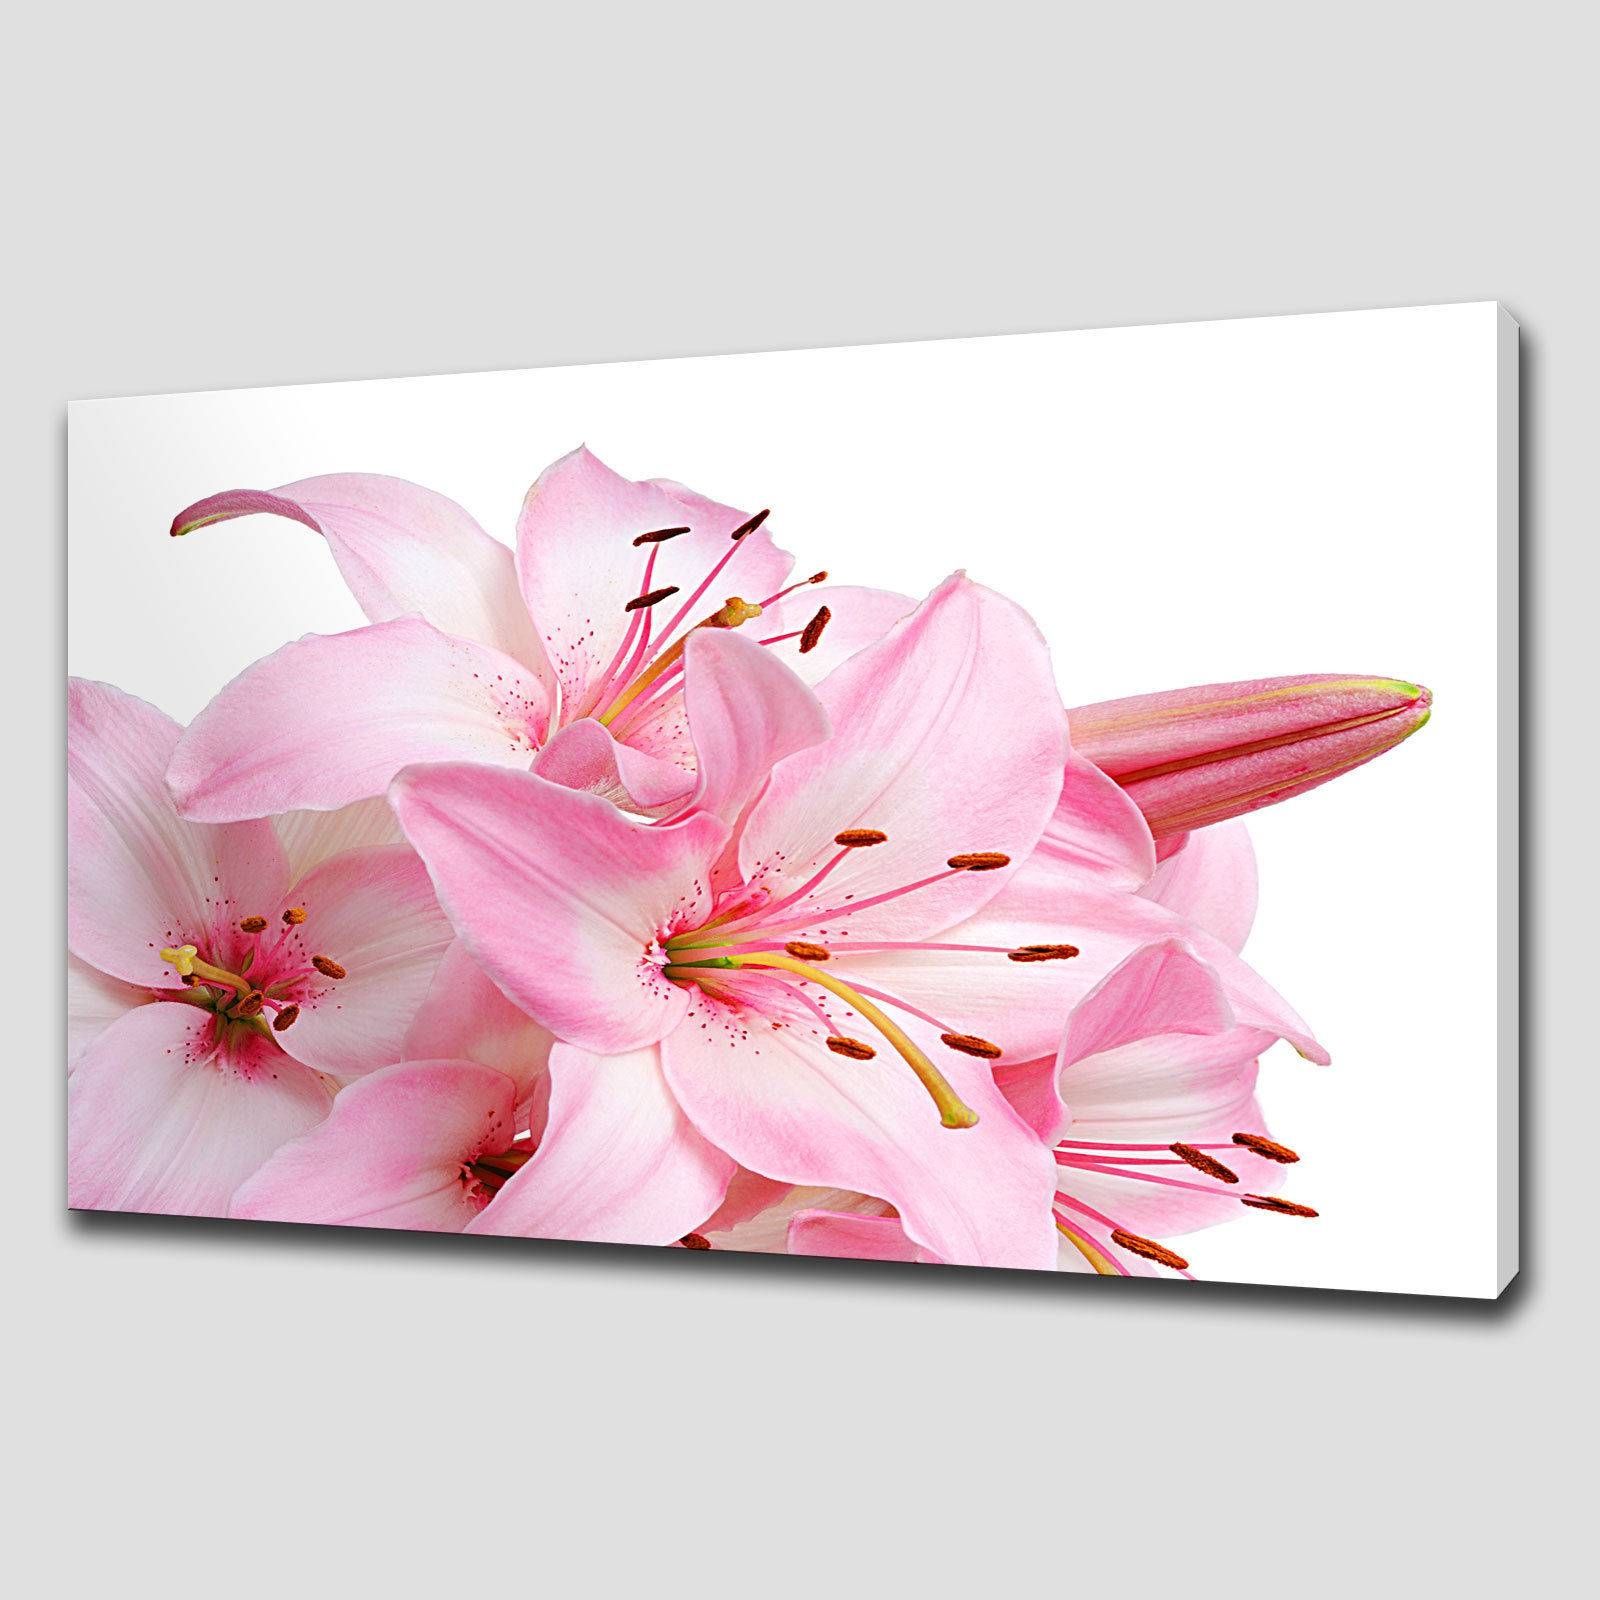 Wall Art Designs: Canvas Floral Wall Art Flowers Paintings Large For Most Recently Released Pink Flower Wall Art (View 1 of 20)